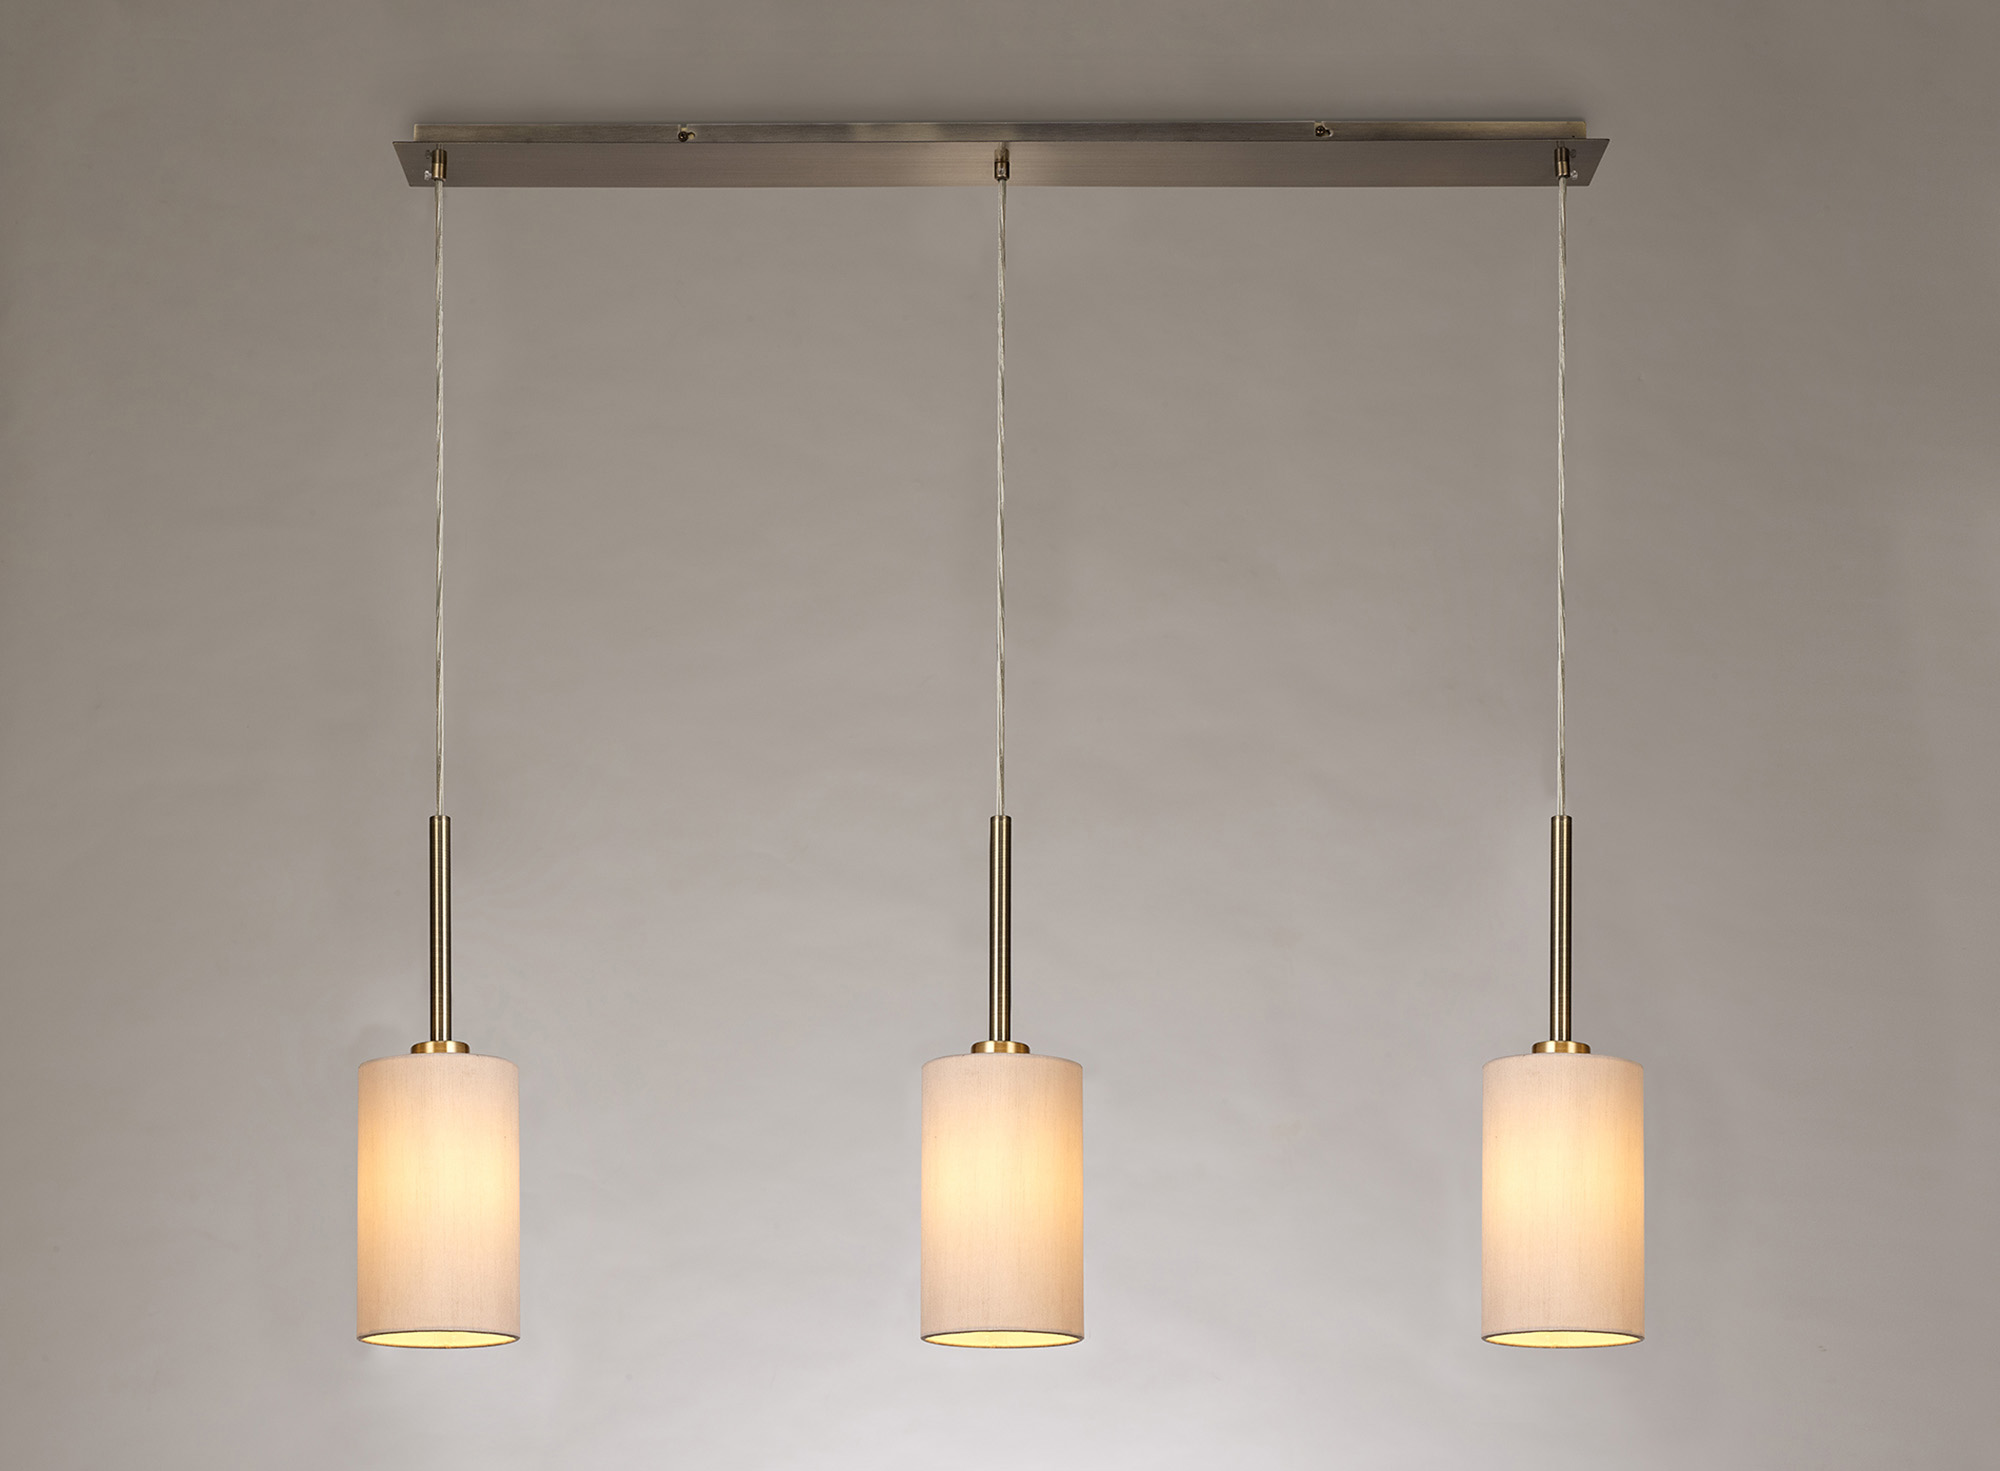 Baymont AB NU Ceiling Lights Deco Linear Fittings